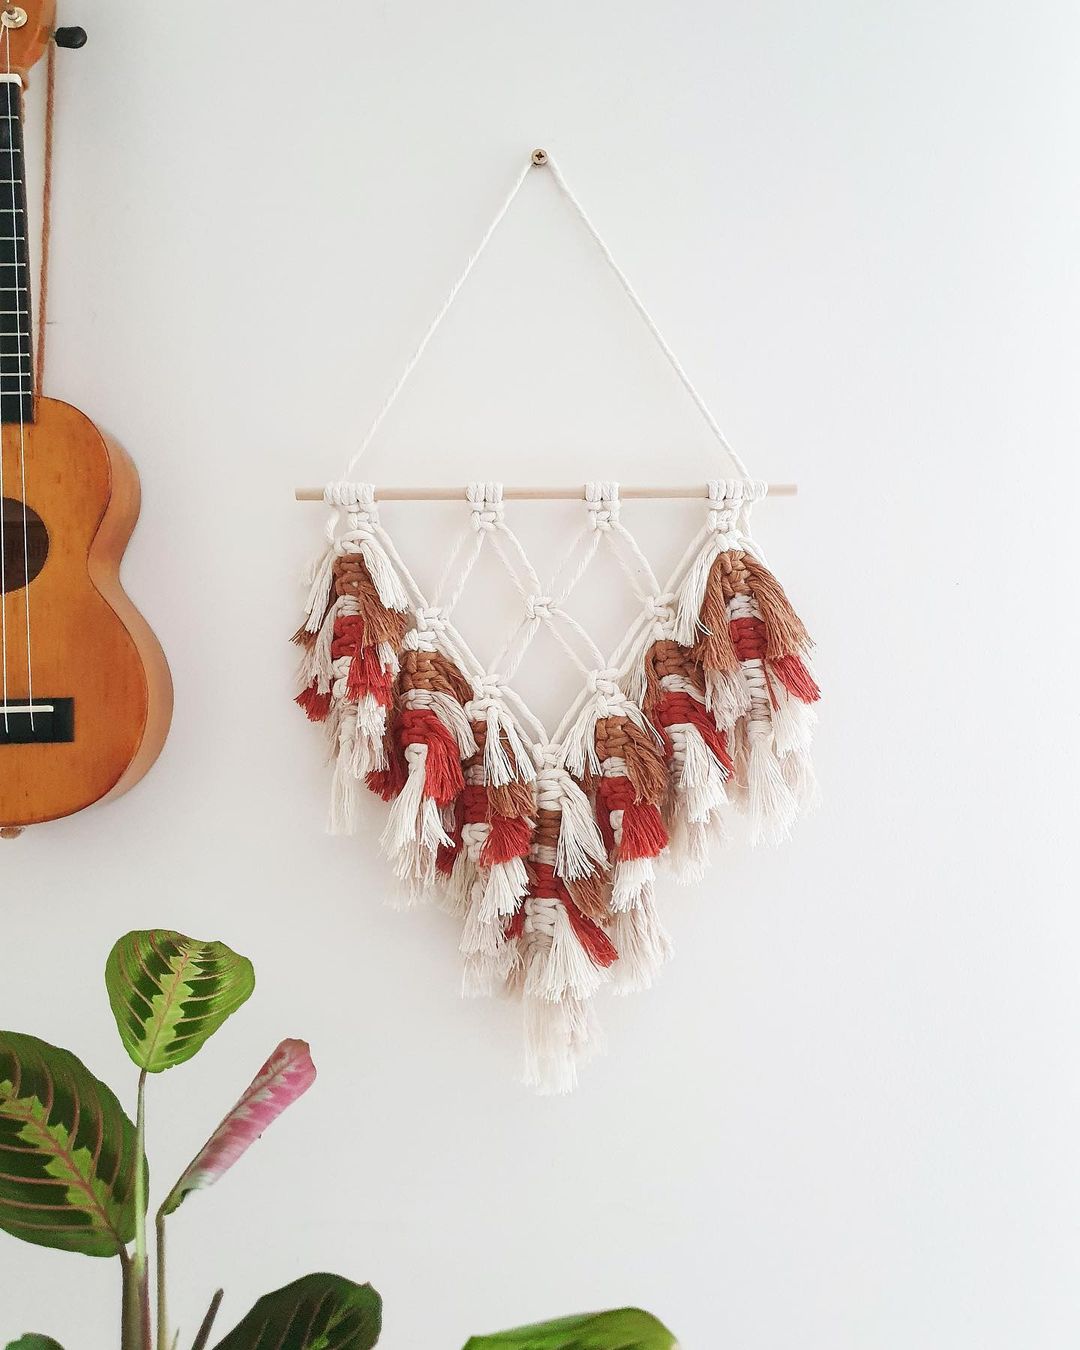 Wall with a ukelele, prayer plant, and tan,rust, and white macrame art piece. Photo by Instagram user @cozyknotsdesign.